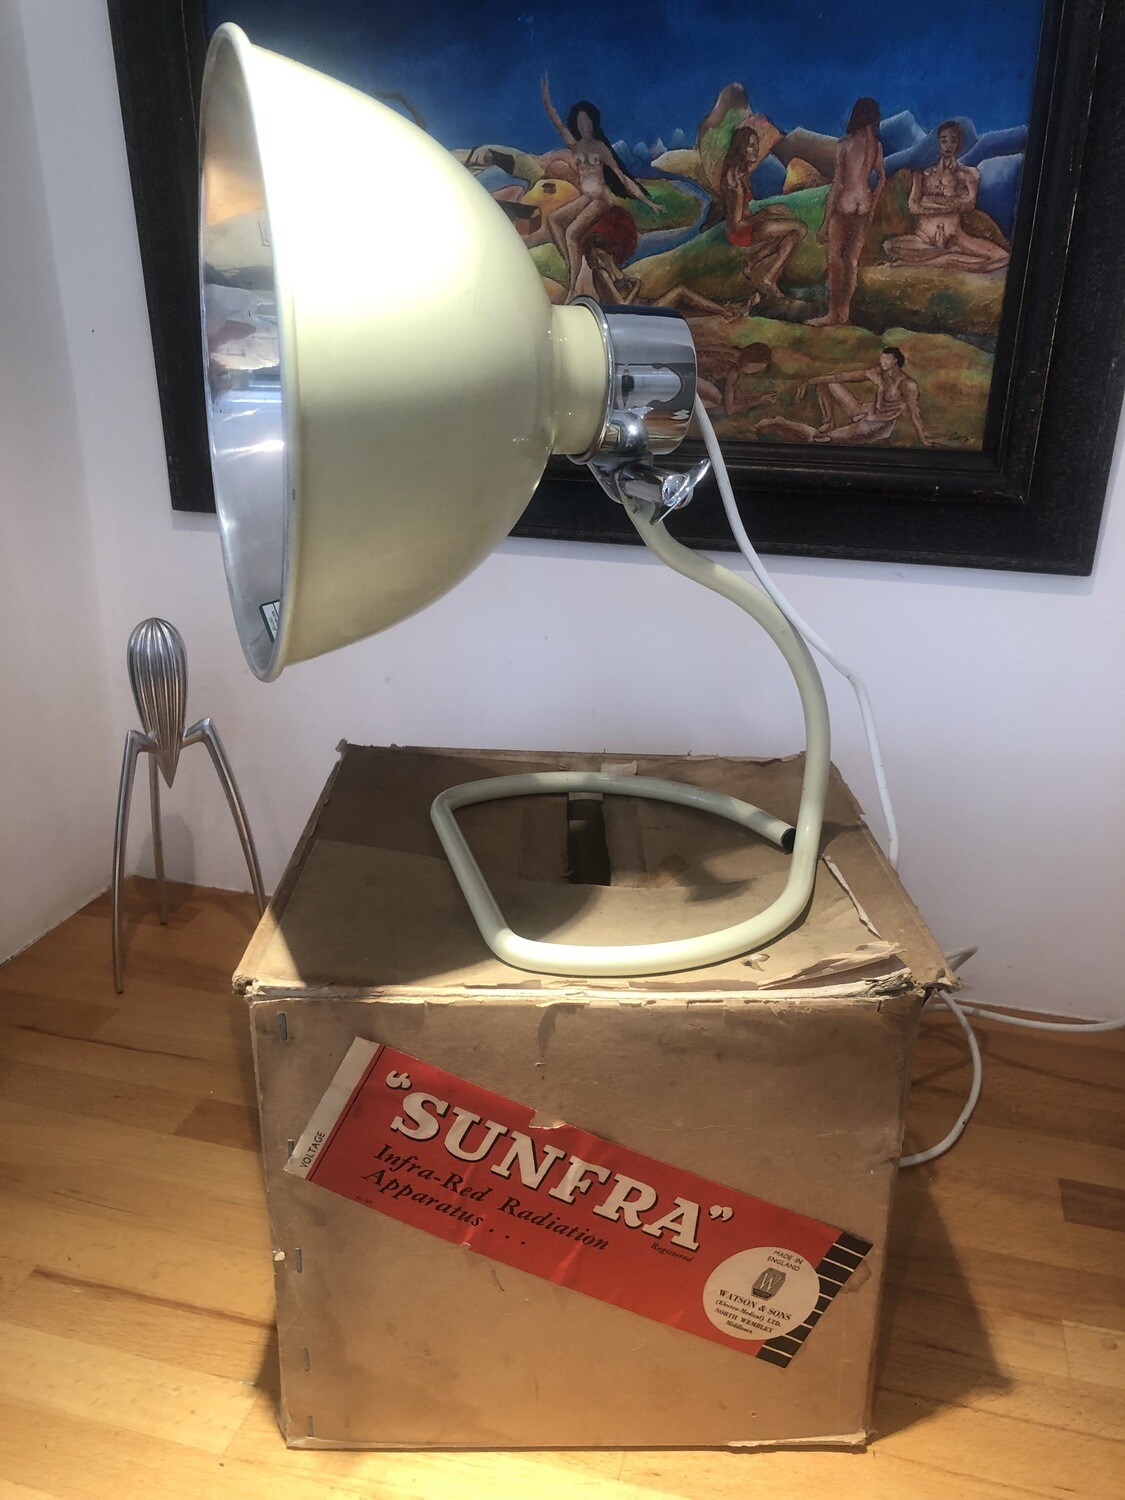 1950's Sunfra desk lamp in mint condition with original box